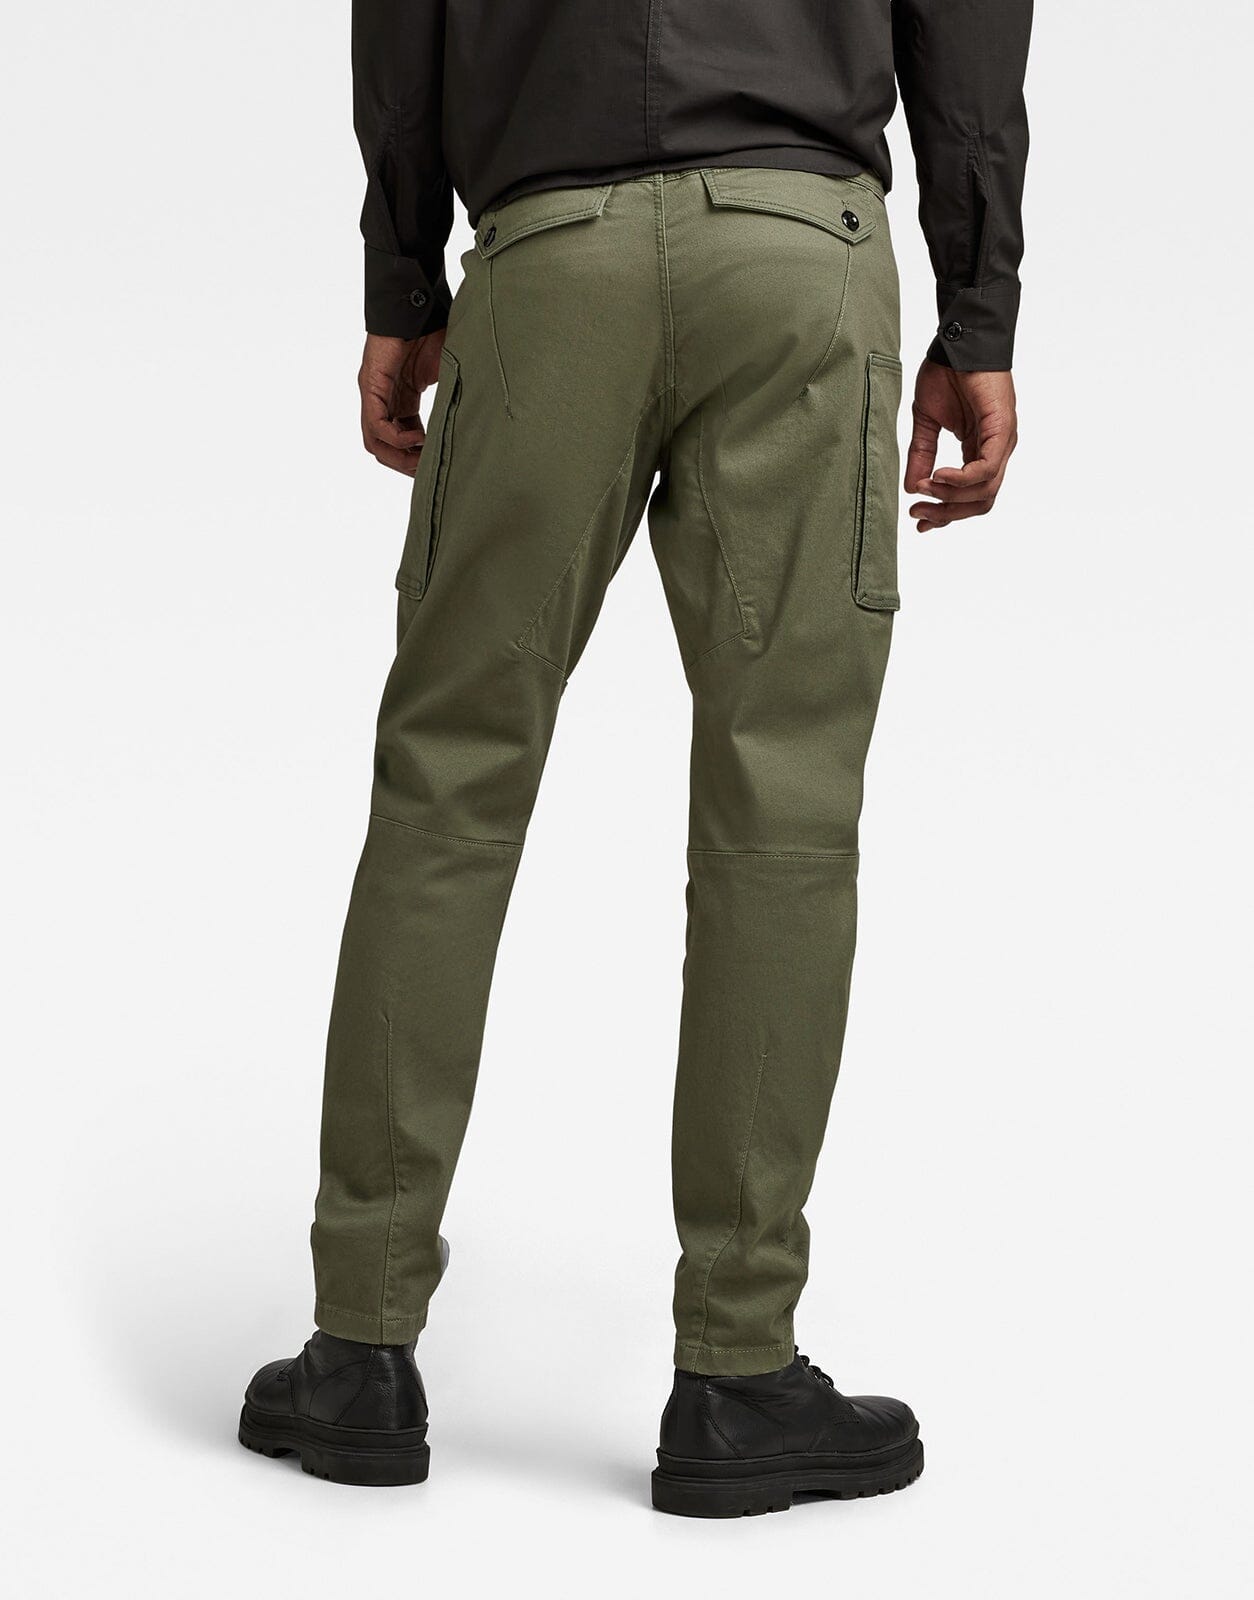 G Star Raw Tapered Cargo Trousers Black | Mainline Menswear United States